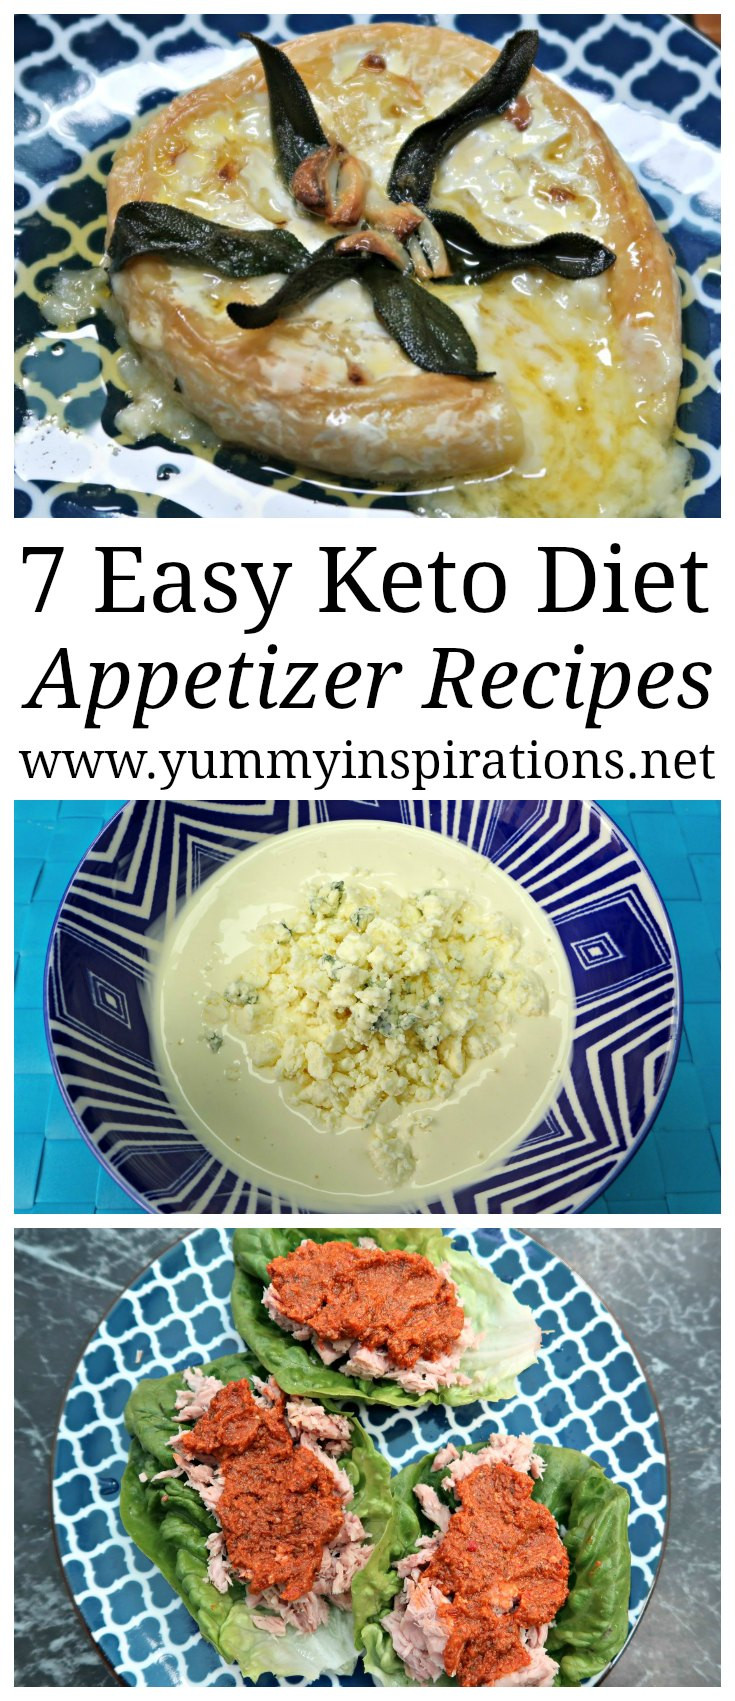 Vegetarian Keto Appetizers
 7 Easy Keto Appetizers Recipes Simple Low Carb Appetizer